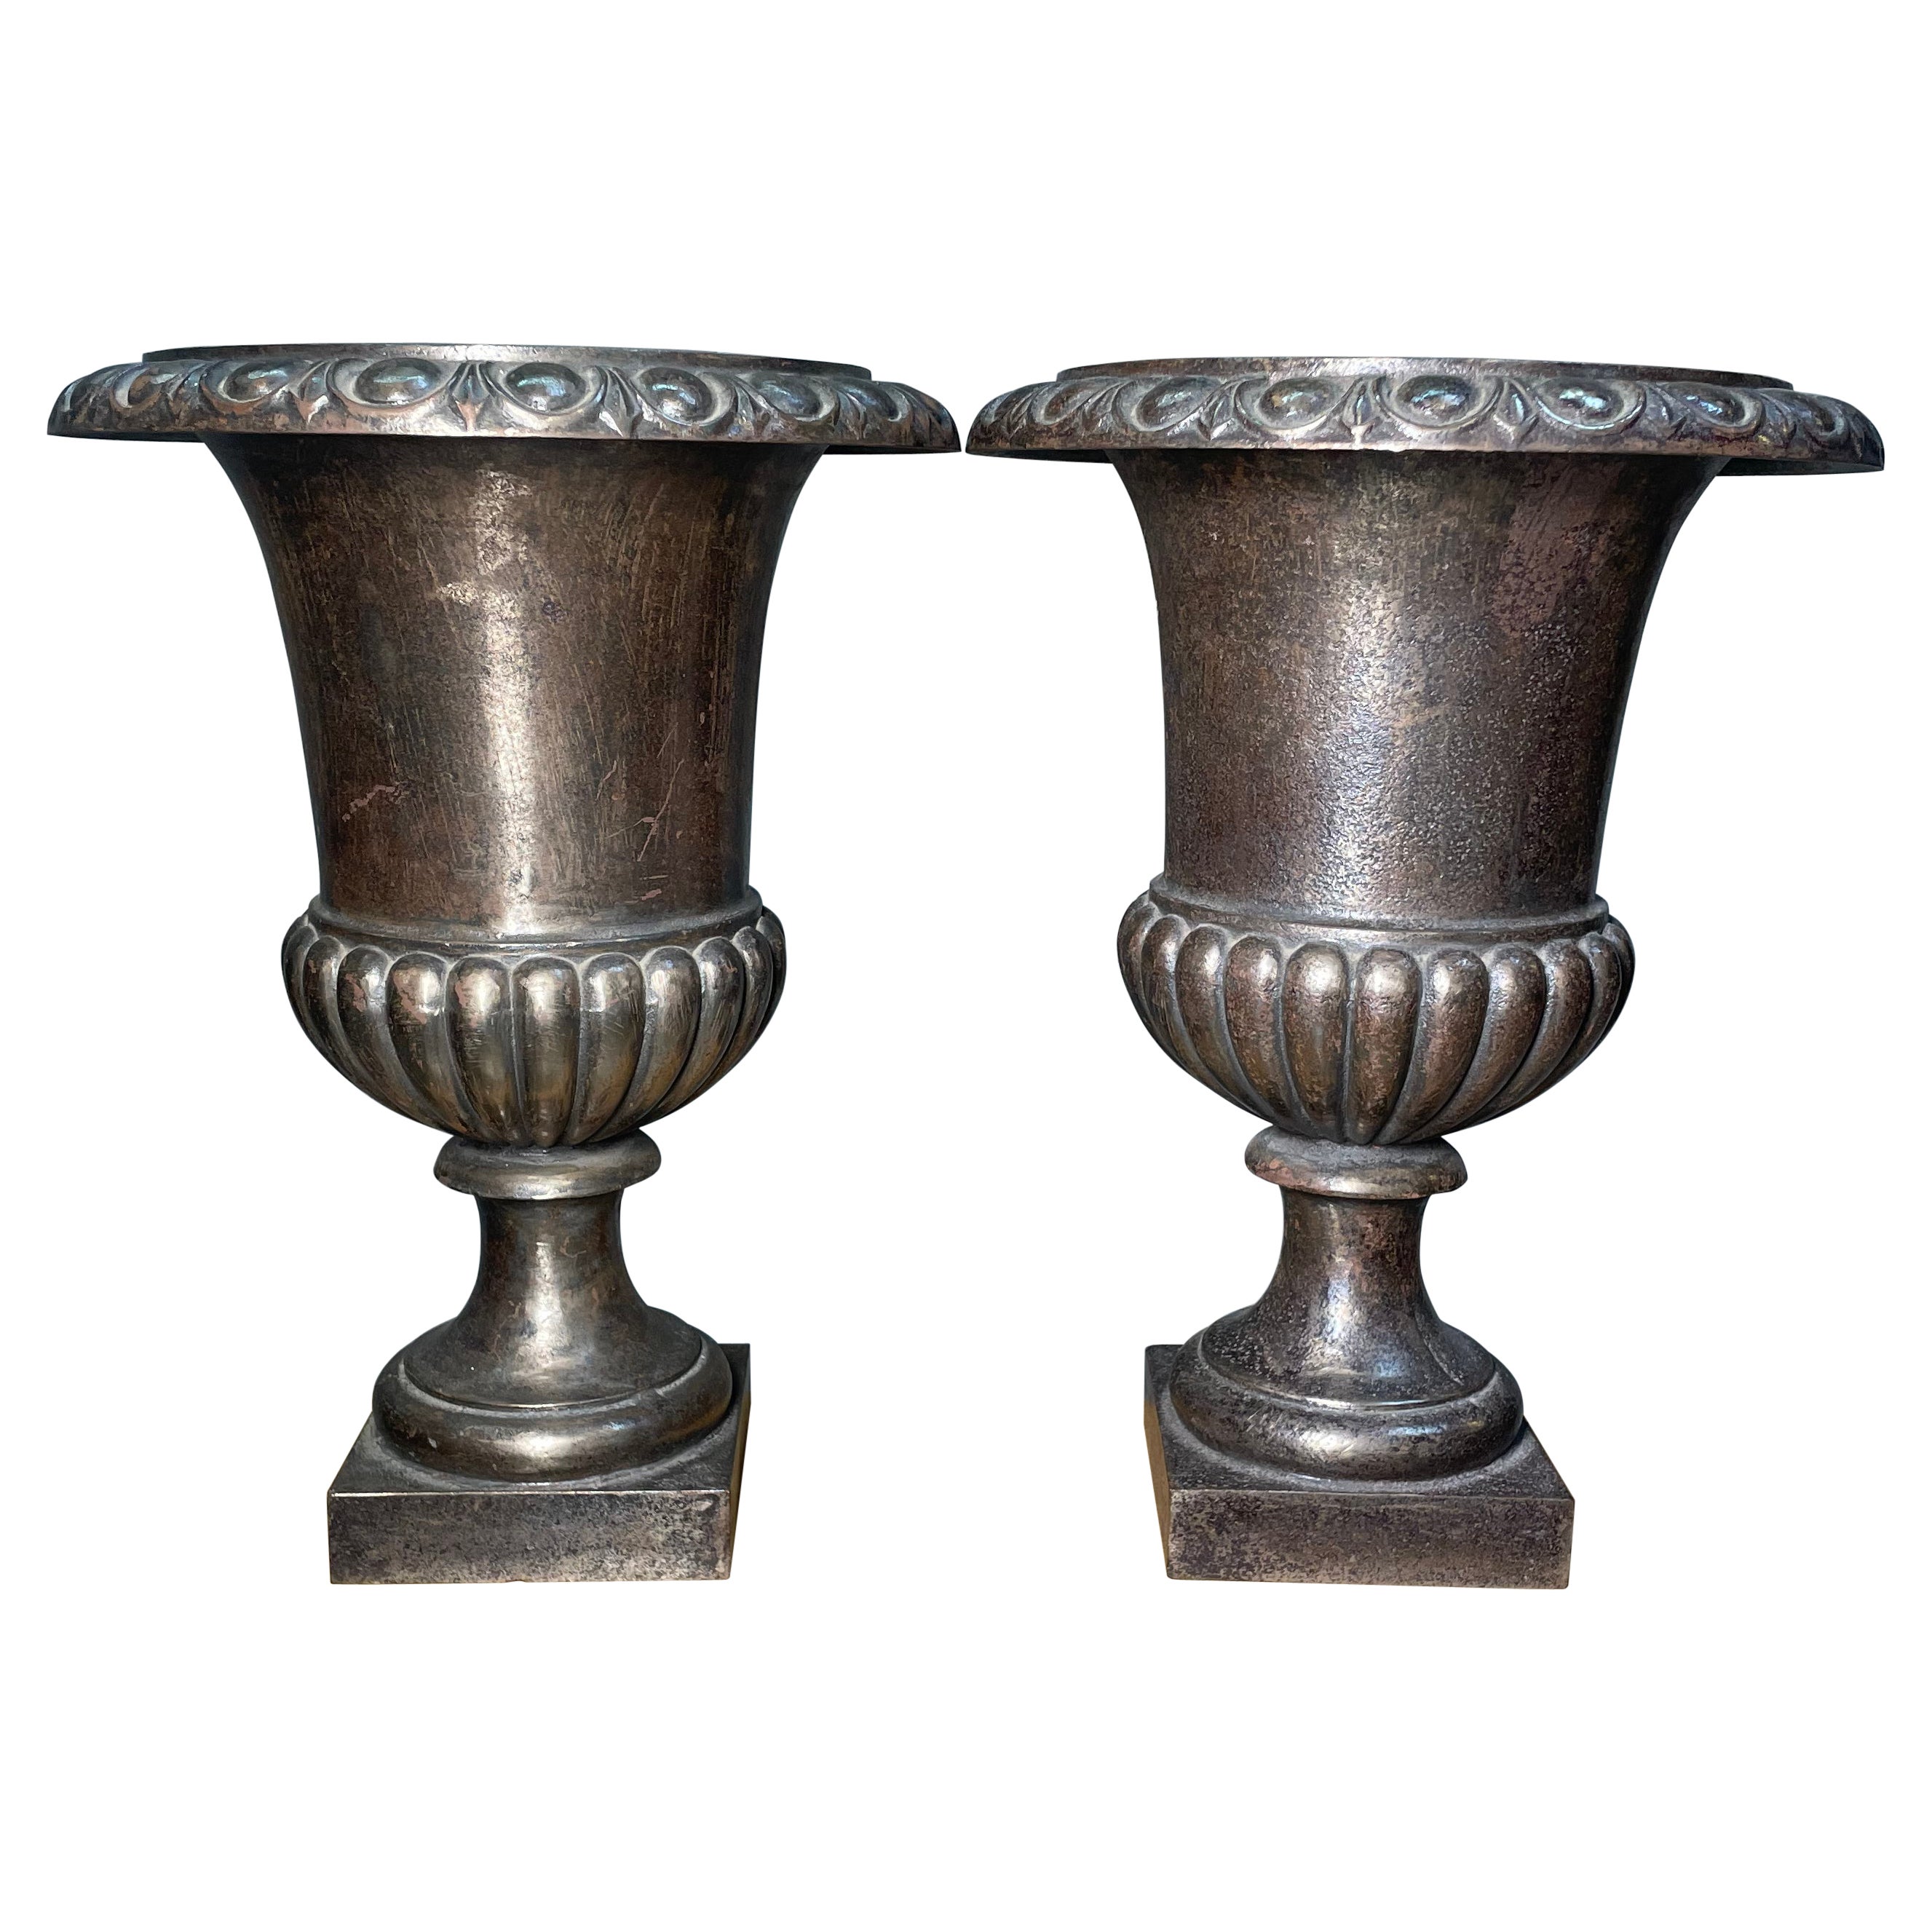 French 19th Century Wrought Iron Urns For Sale